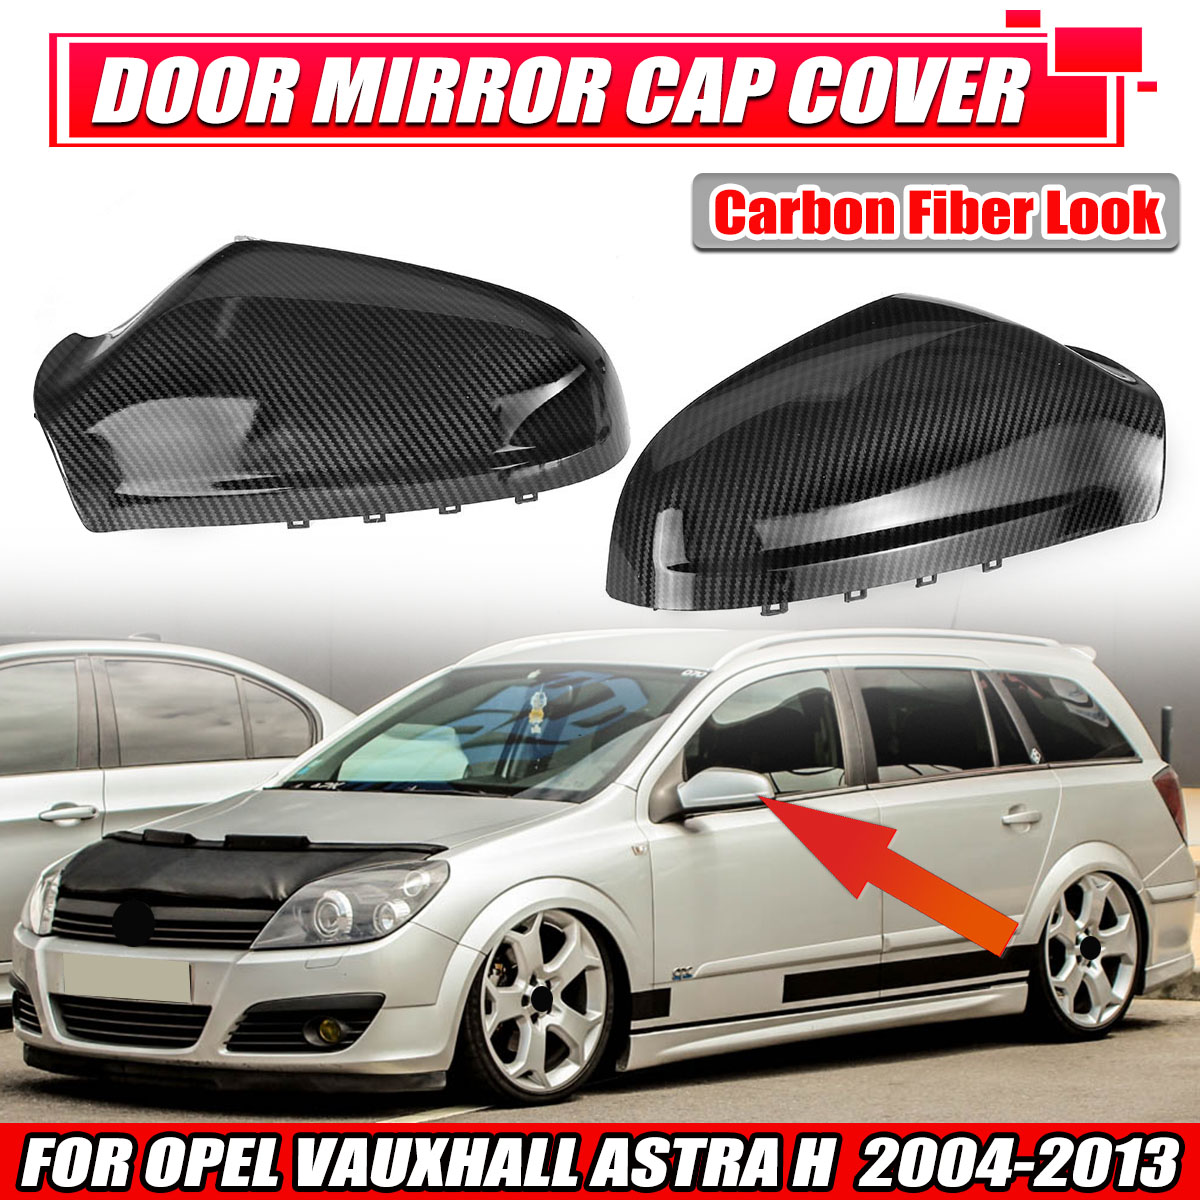 Carbon Fiber Look Door Wing Rearview Mirror Cover Rear View Caps For Opel Vauxhall Astra H  2004-2013